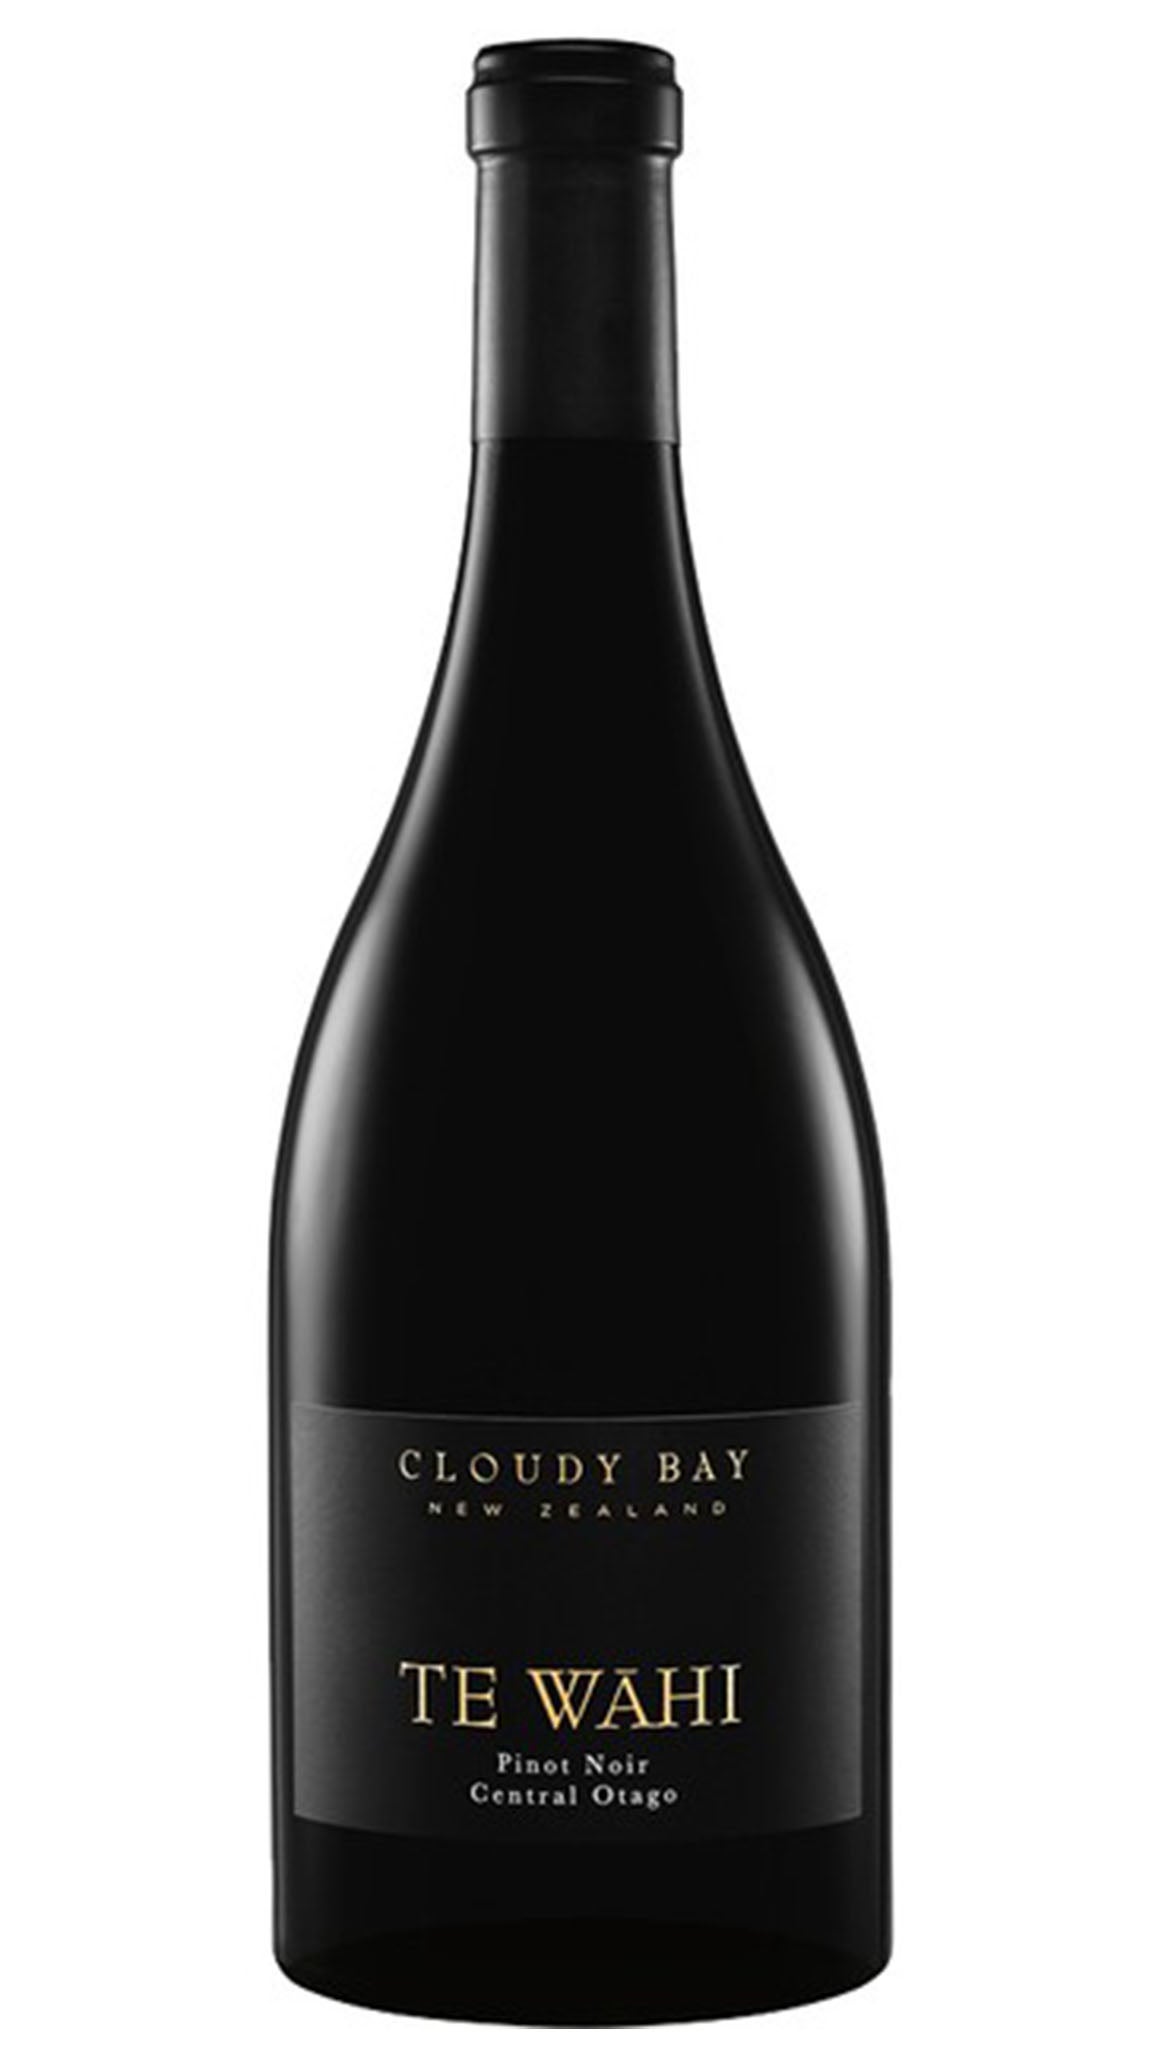 Noir Fine - Wine Wahi 2018 Pinot Cloudy Delivery Bay Te